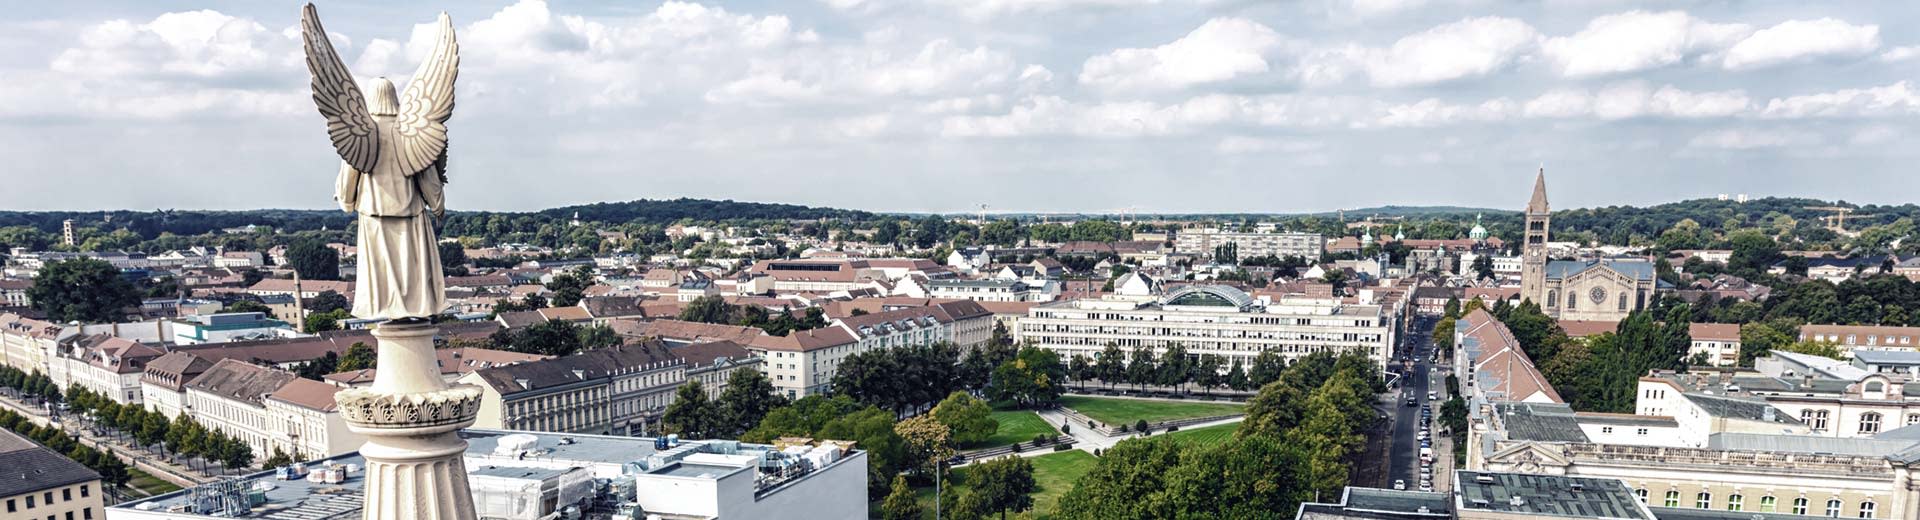 The beautiful east German town of Potsdam, with low-rise buildigns and plenty of green parks.